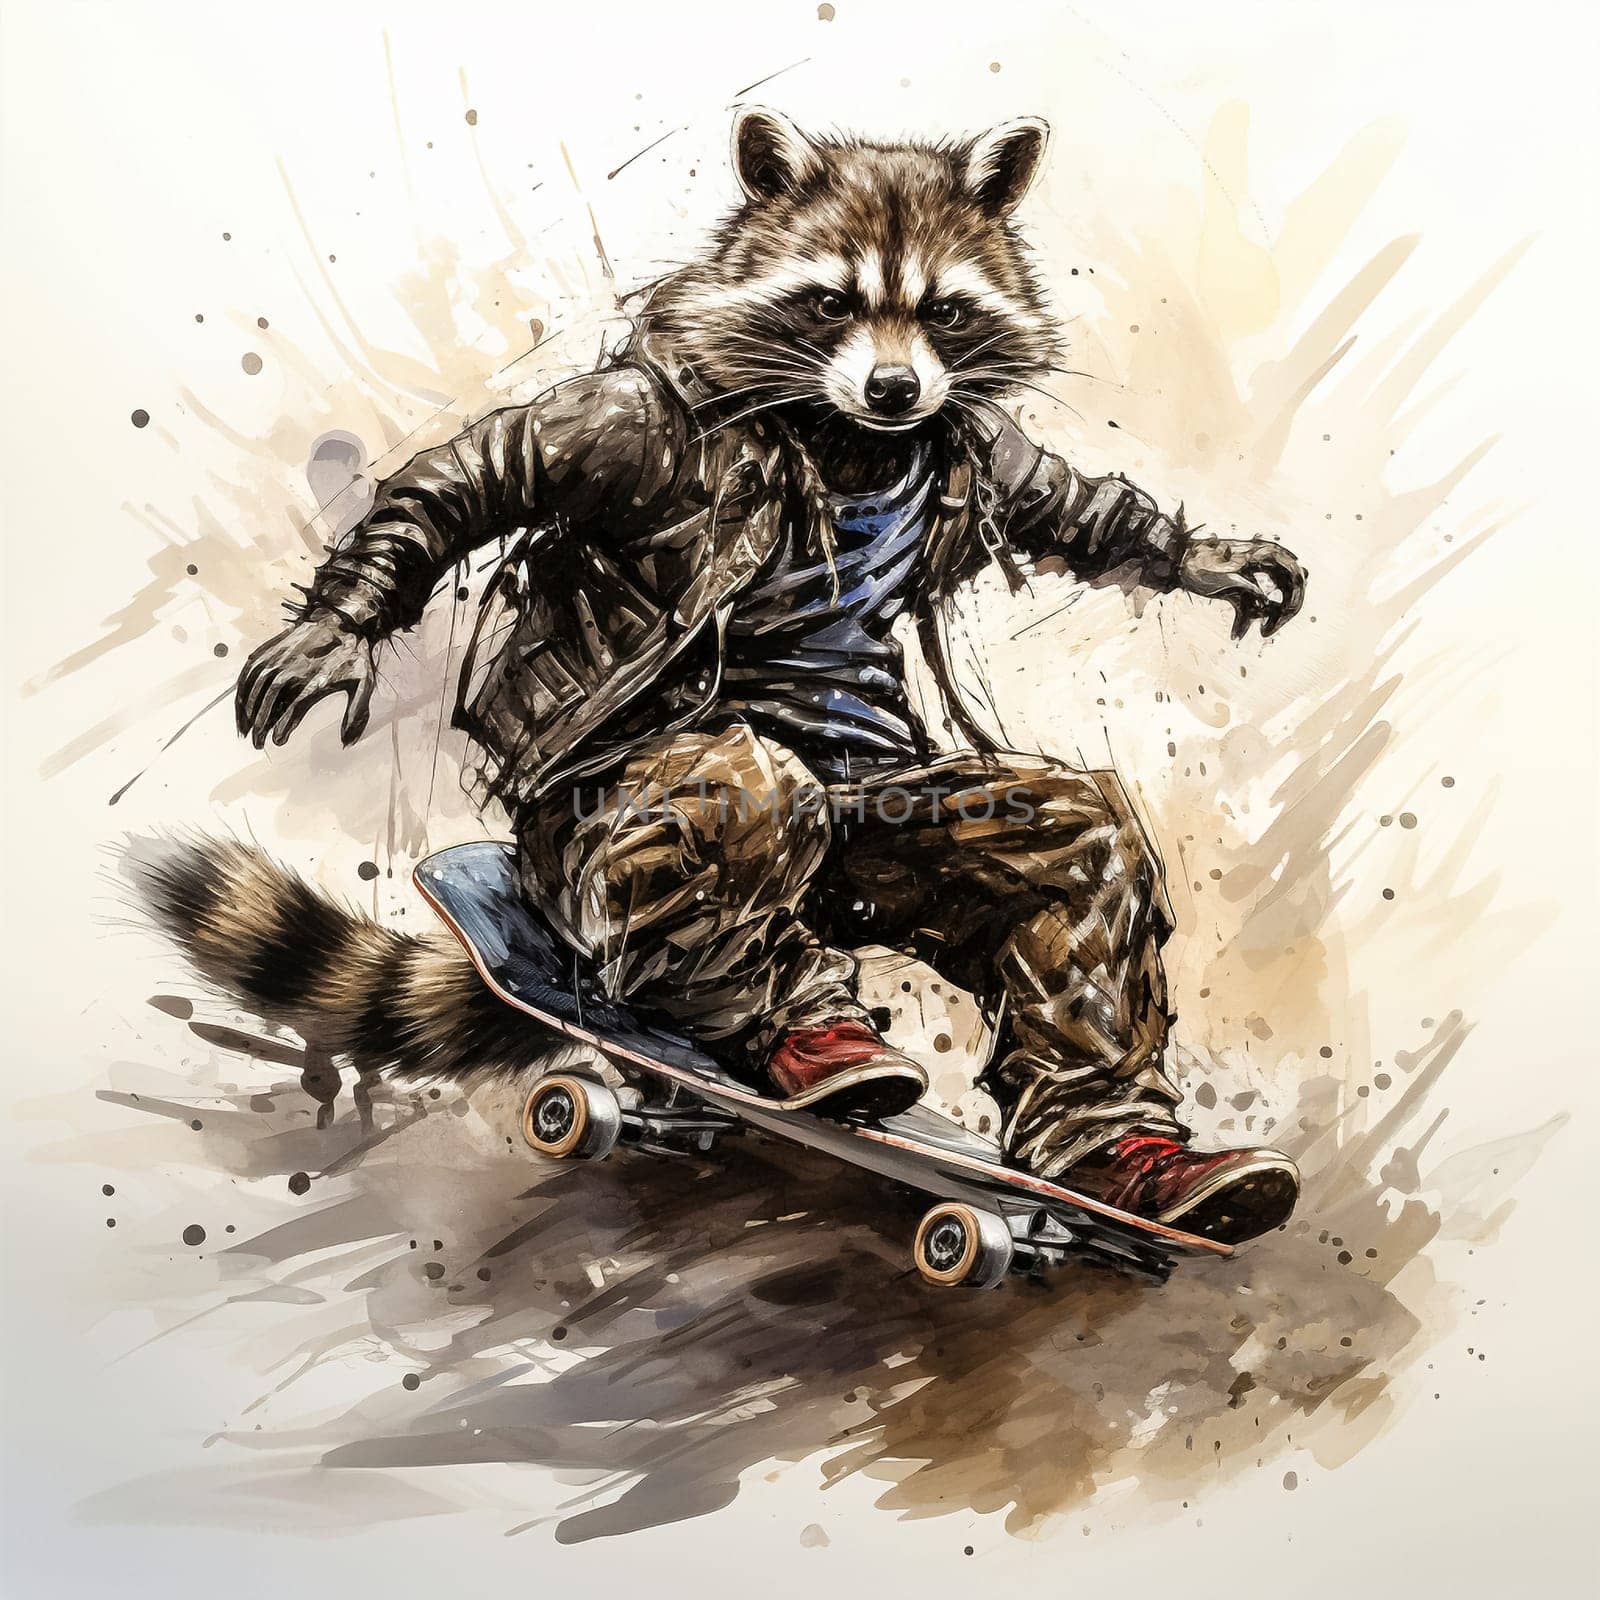 A delightful watercolor illustration capturing a raccoon skillfully riding a skateboard by Alla_Morozova93